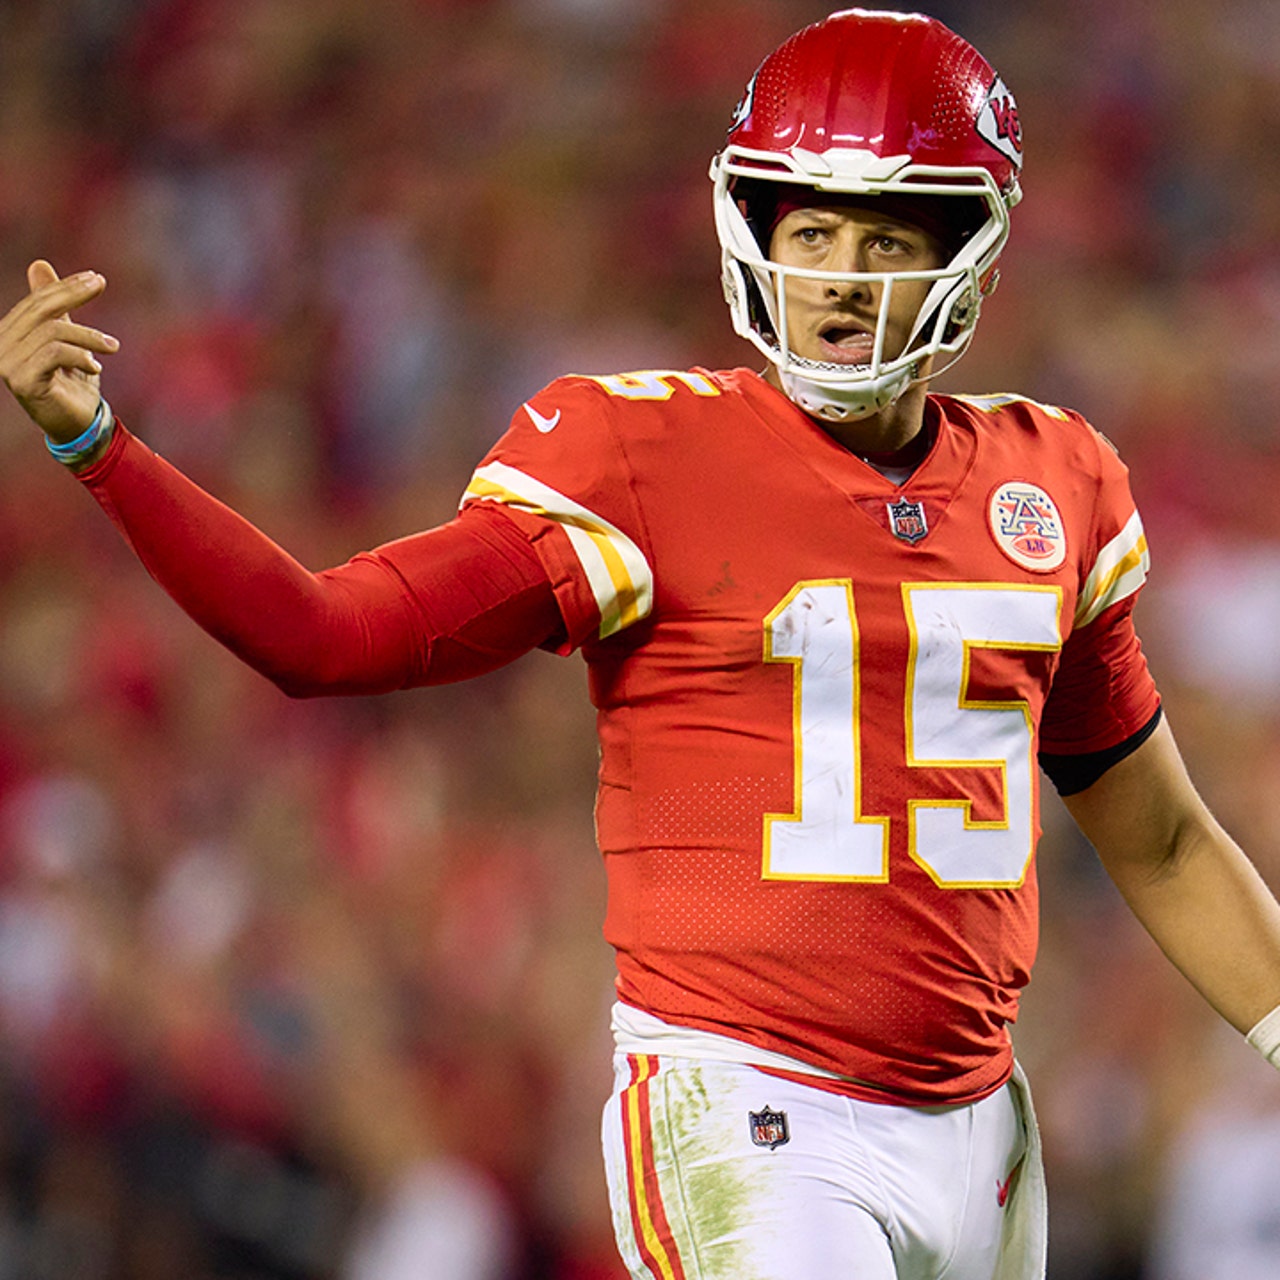 Patrick Mahomes throws 4 TDs in Chiefs MNF win over Raiders in Week 5, UNDISPUTED